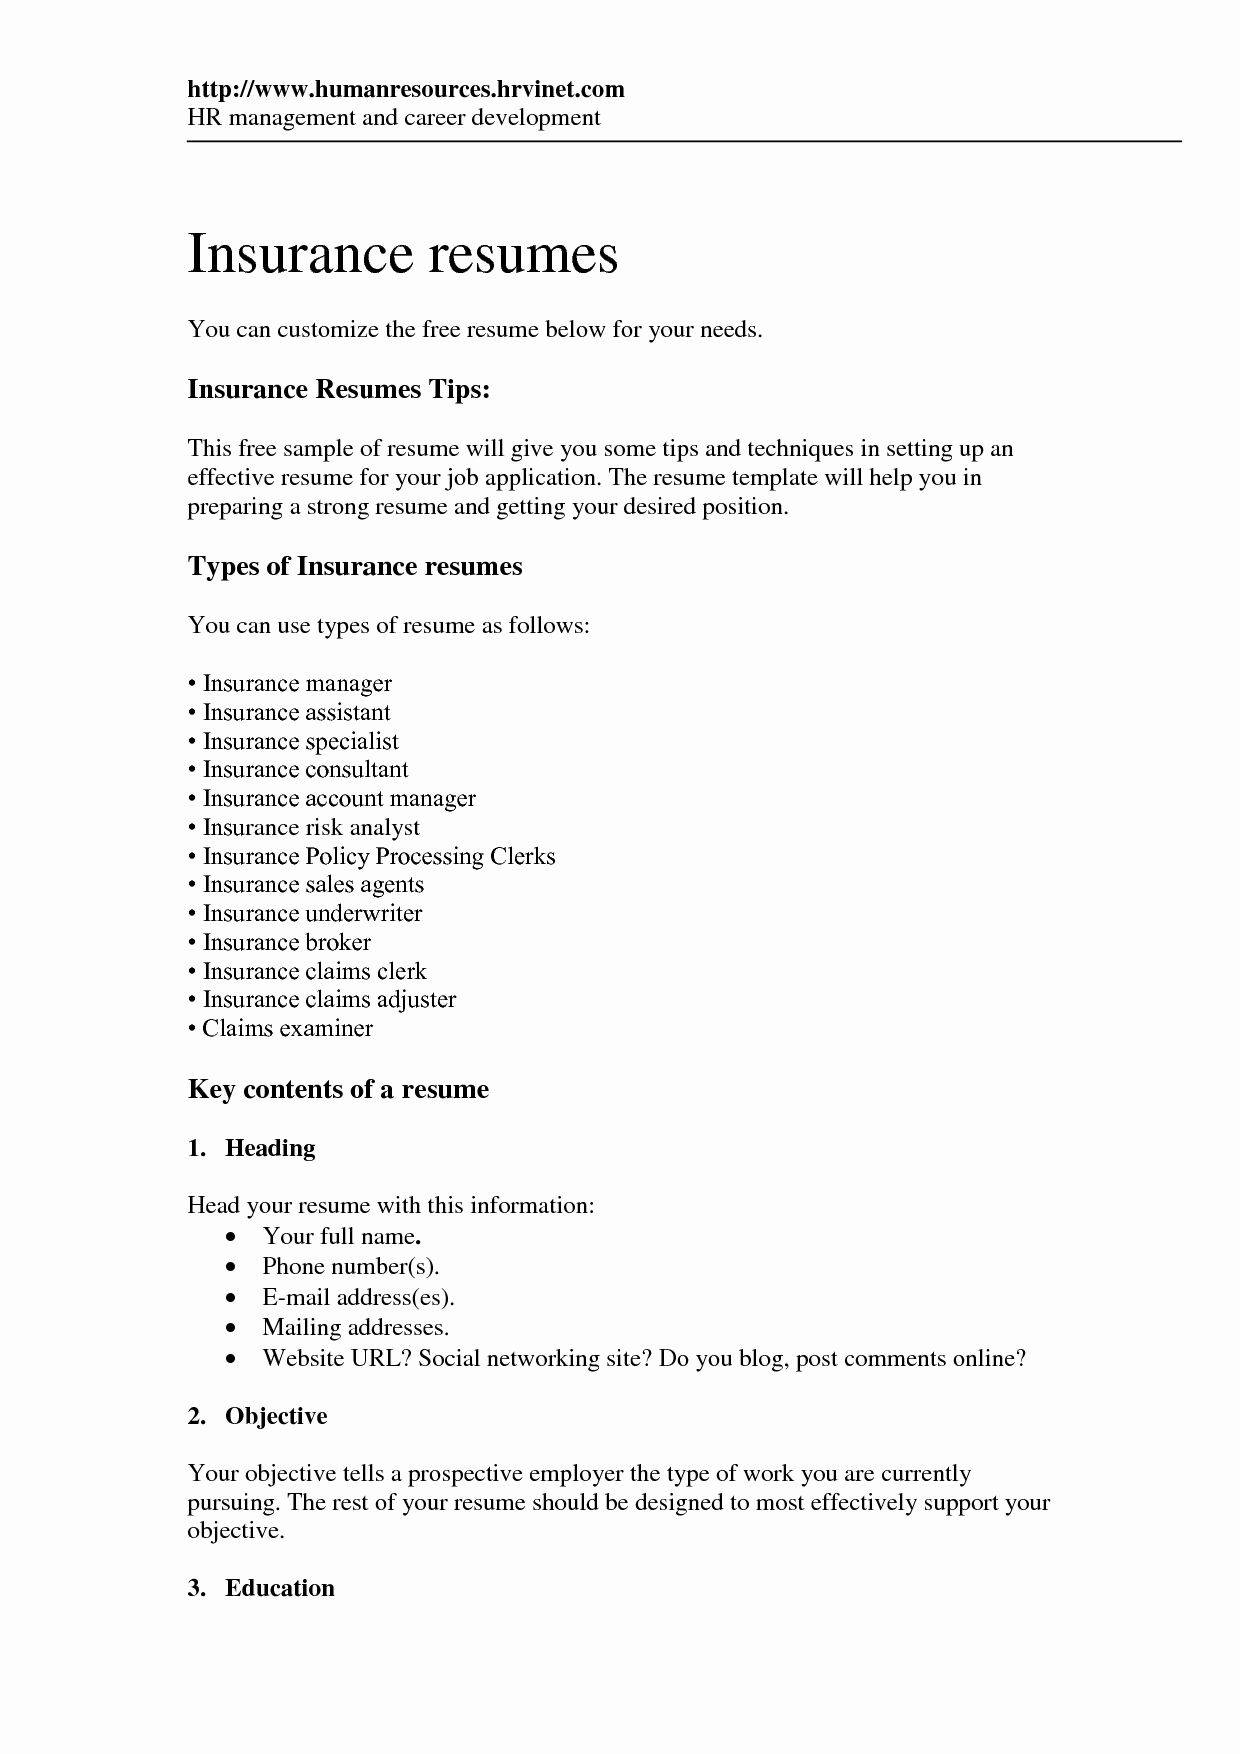 Pleasant Resume for Insurance Claims Adjuster for